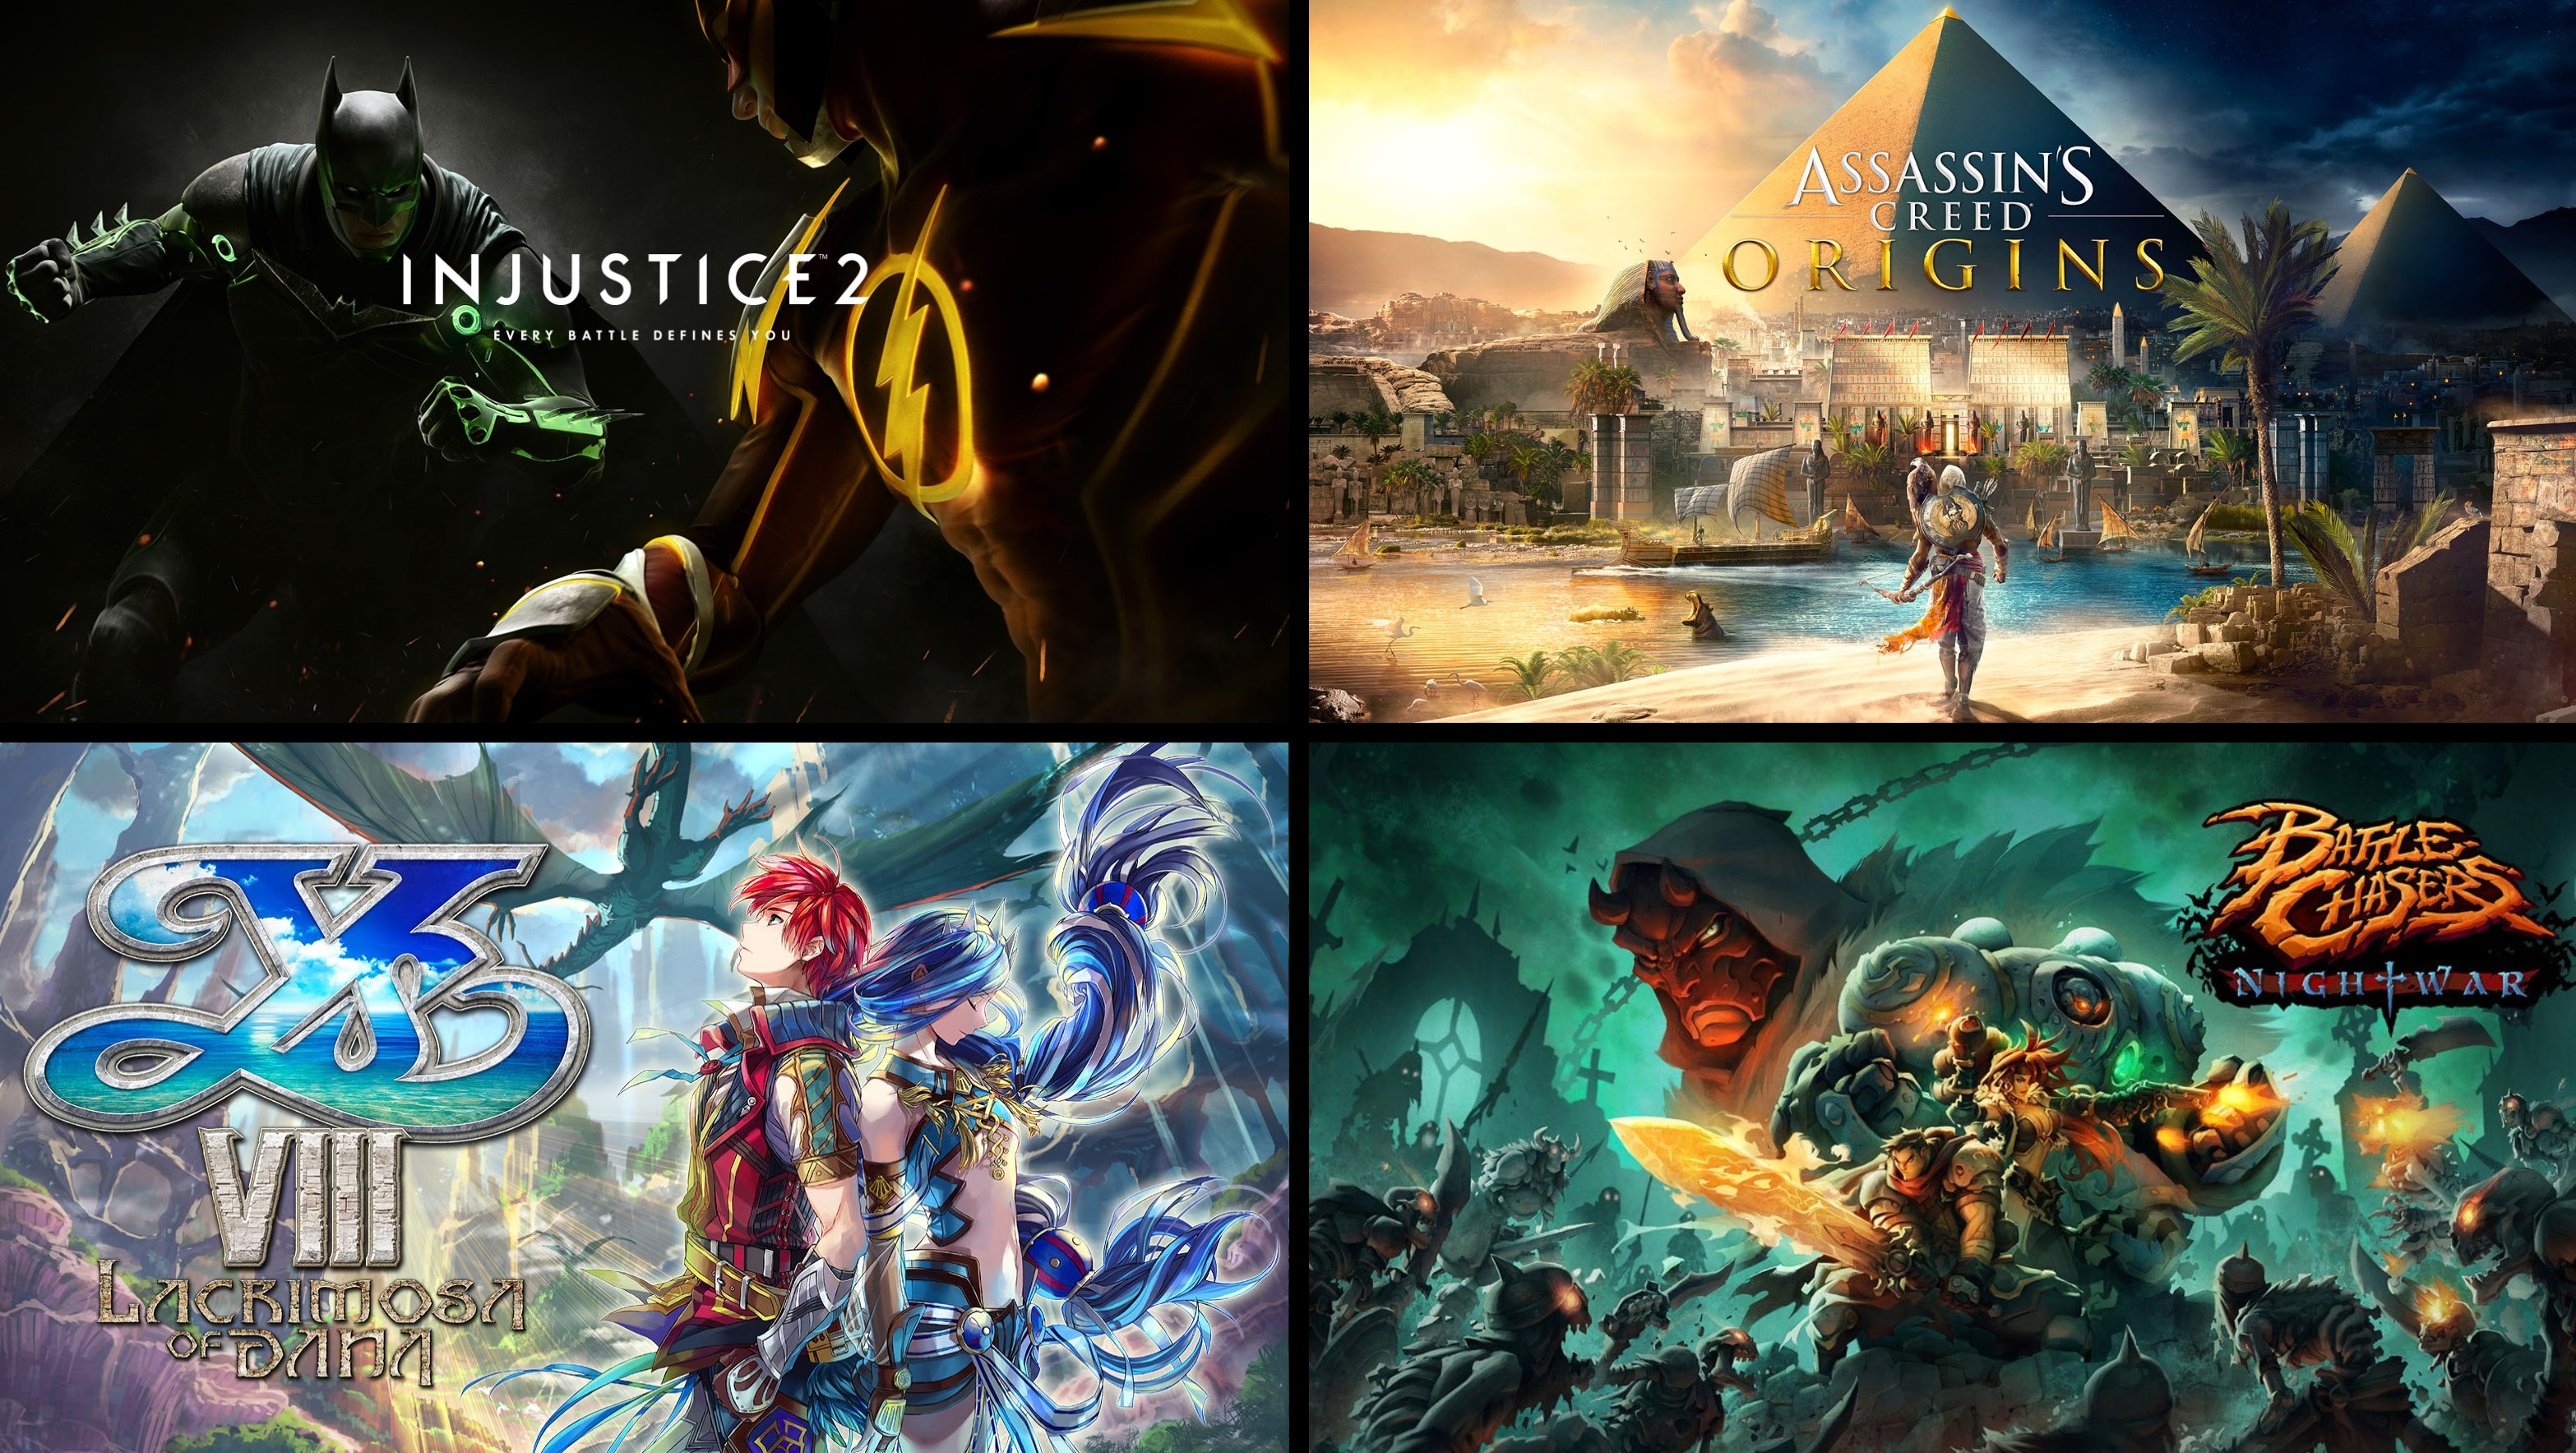 Injustice2 ys viii battle chasers assassin's creed origins